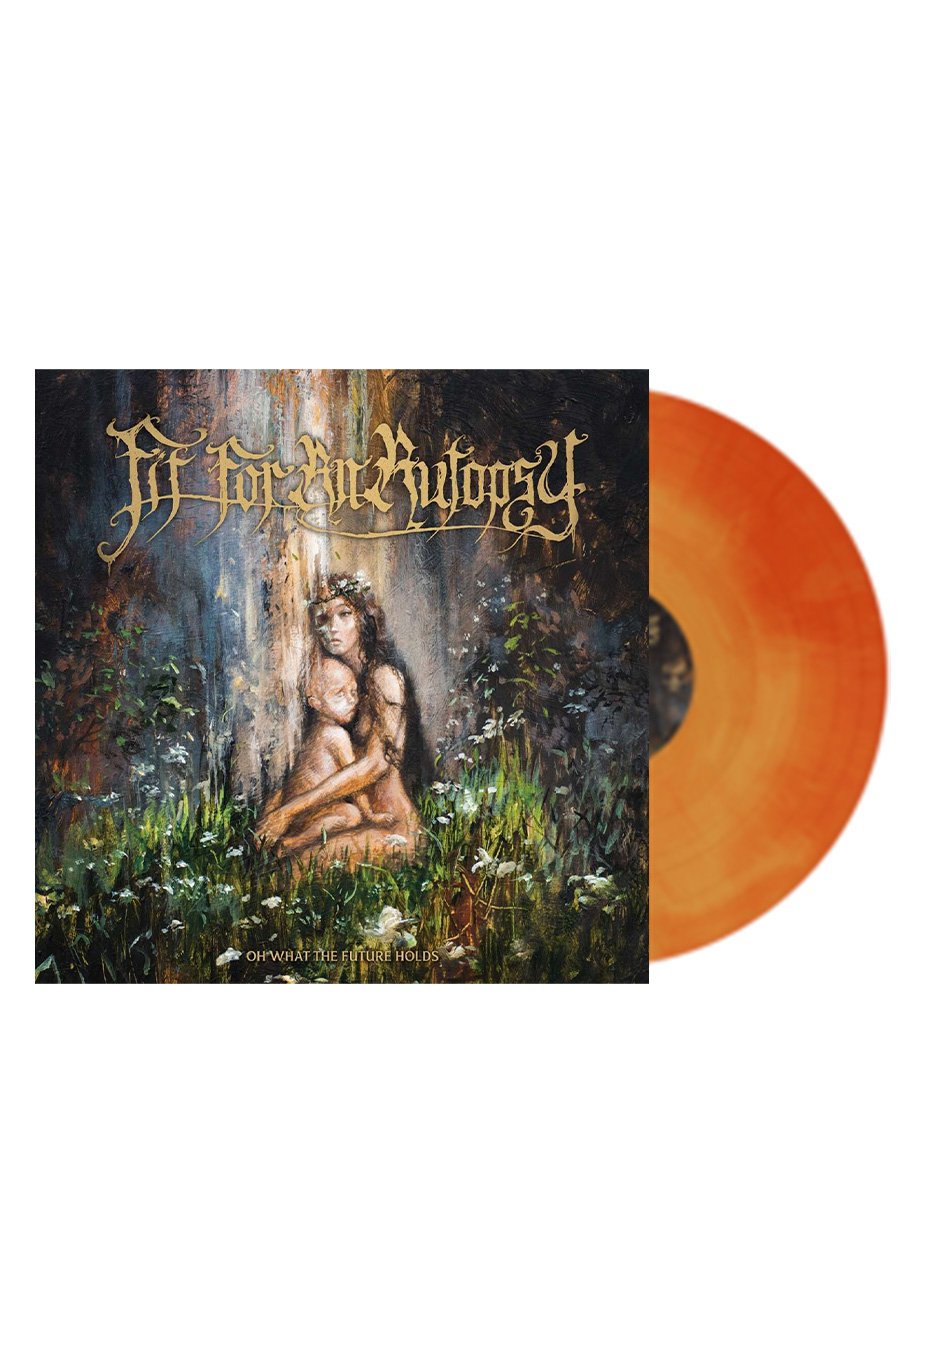 Fit For An Autopsy - Oh What The Future Holds Ltd. Orange Galaxy - Colored Vinyl